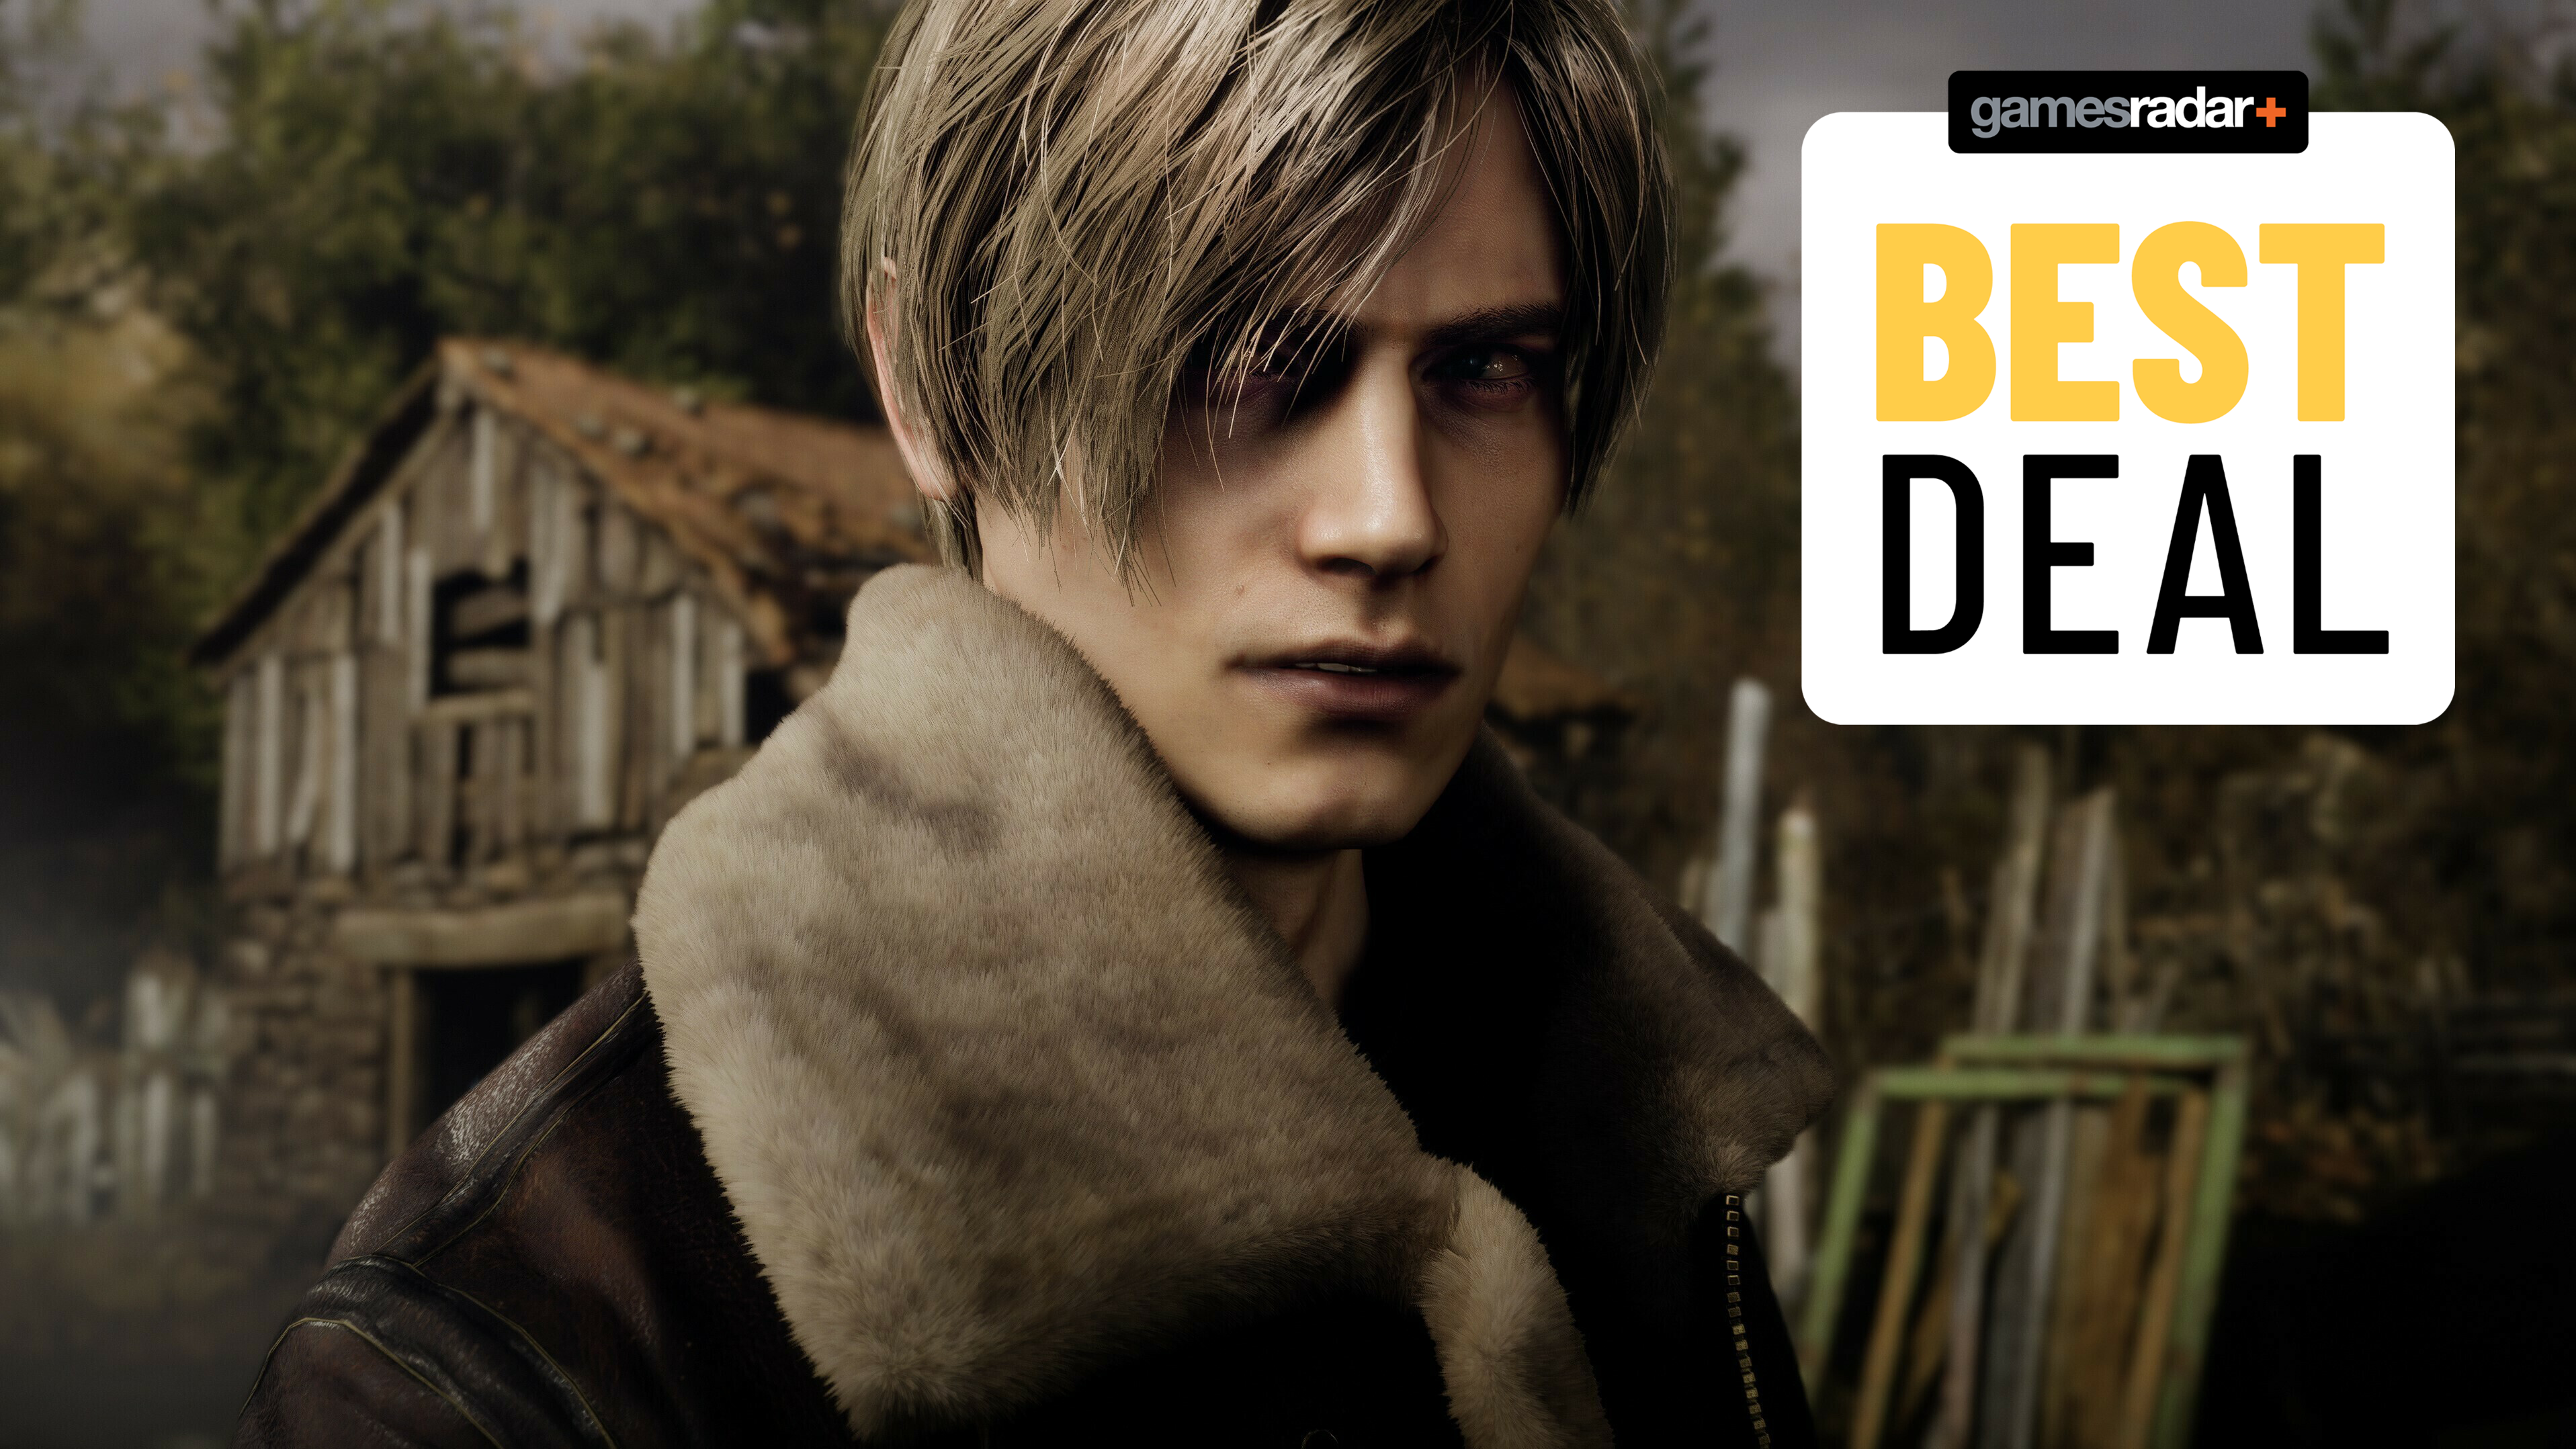 Resident Evil 4 Remake is now over 20% off – lowest price since launch